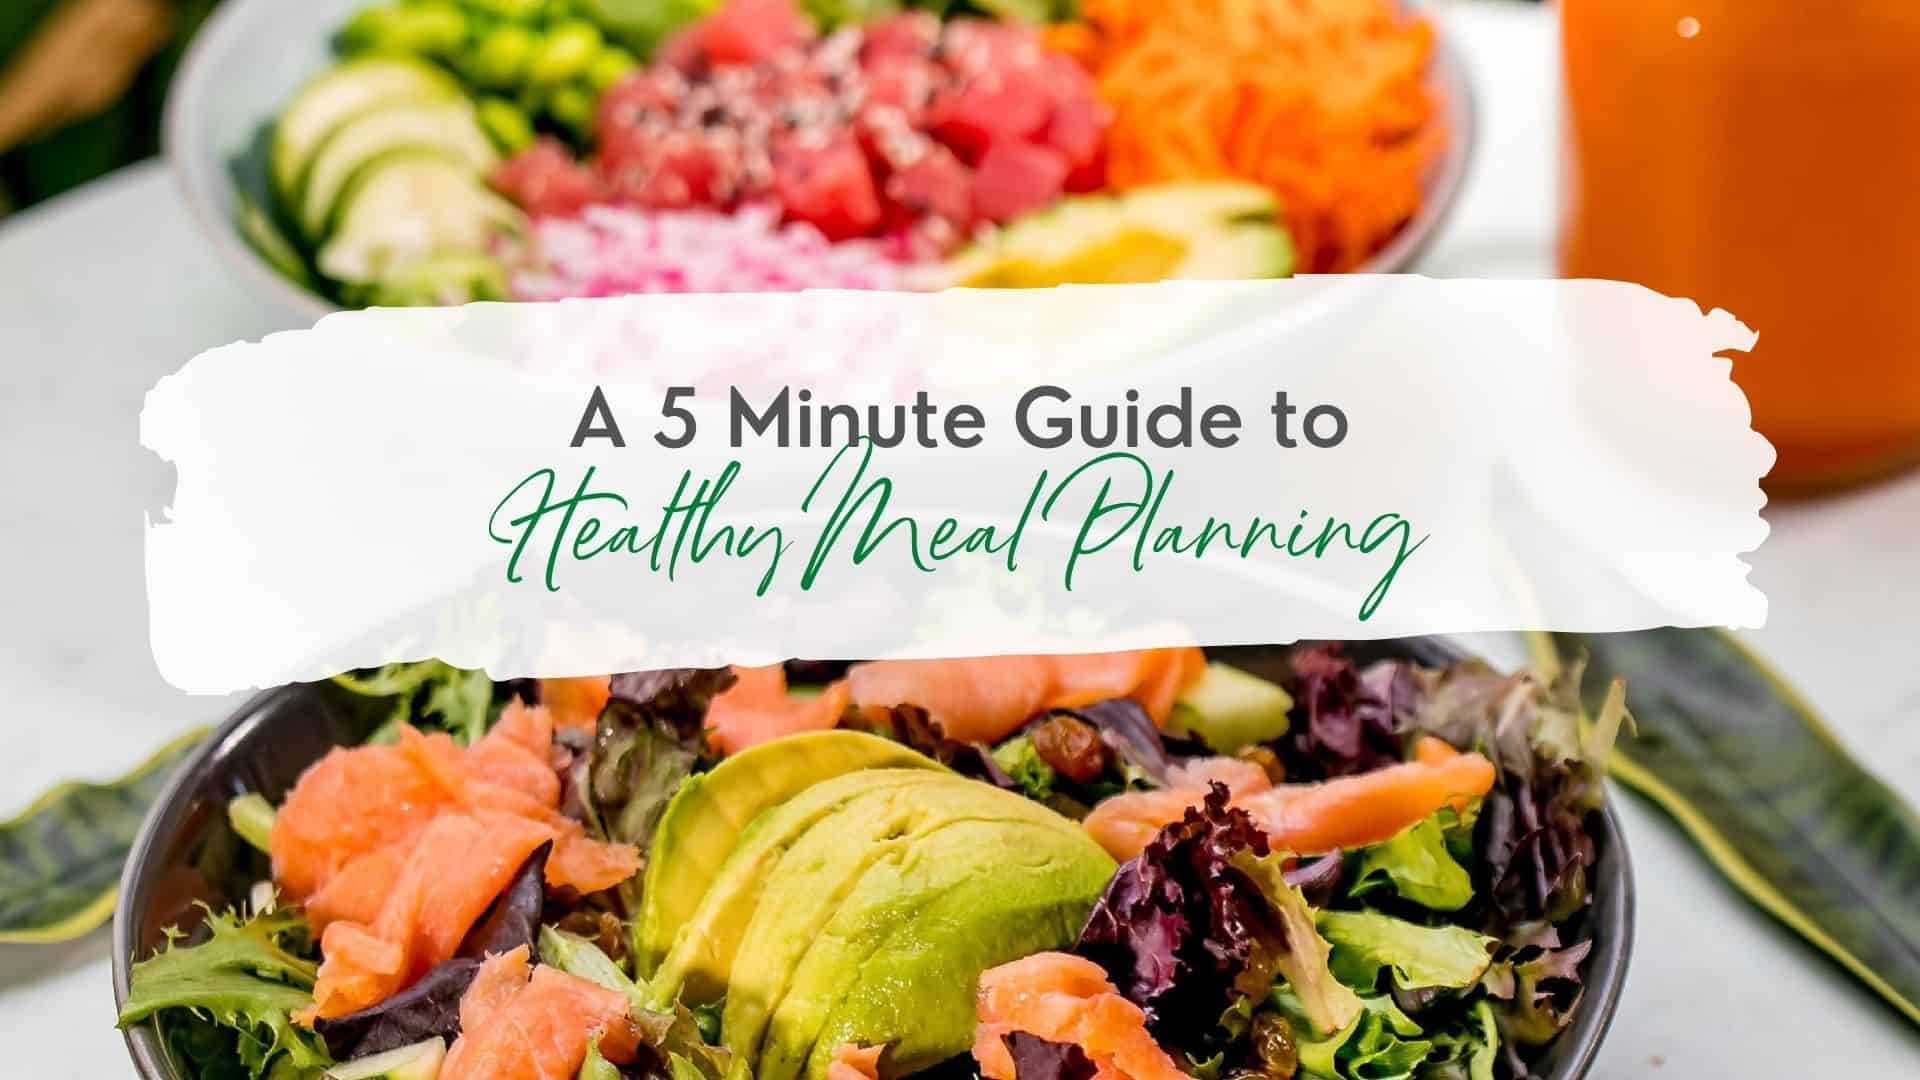 A 5 Minute Guide to Healthy Meal Planning